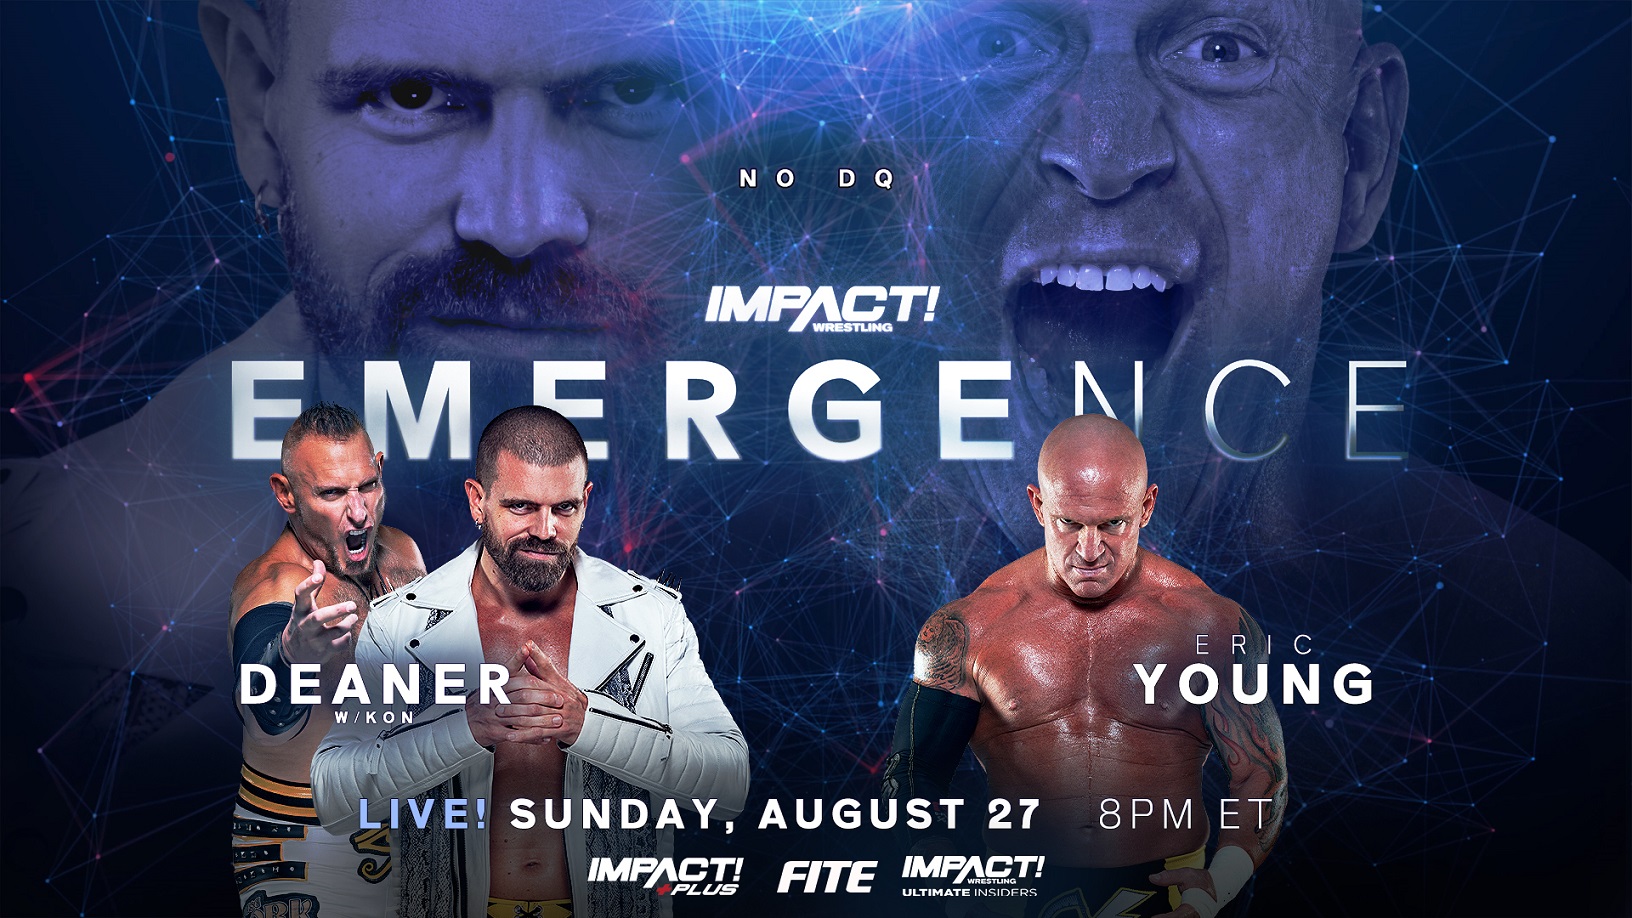 Deaner Battles His Former Leader Eric Young in Emergence No DQ Match – IMPACT Wrestling